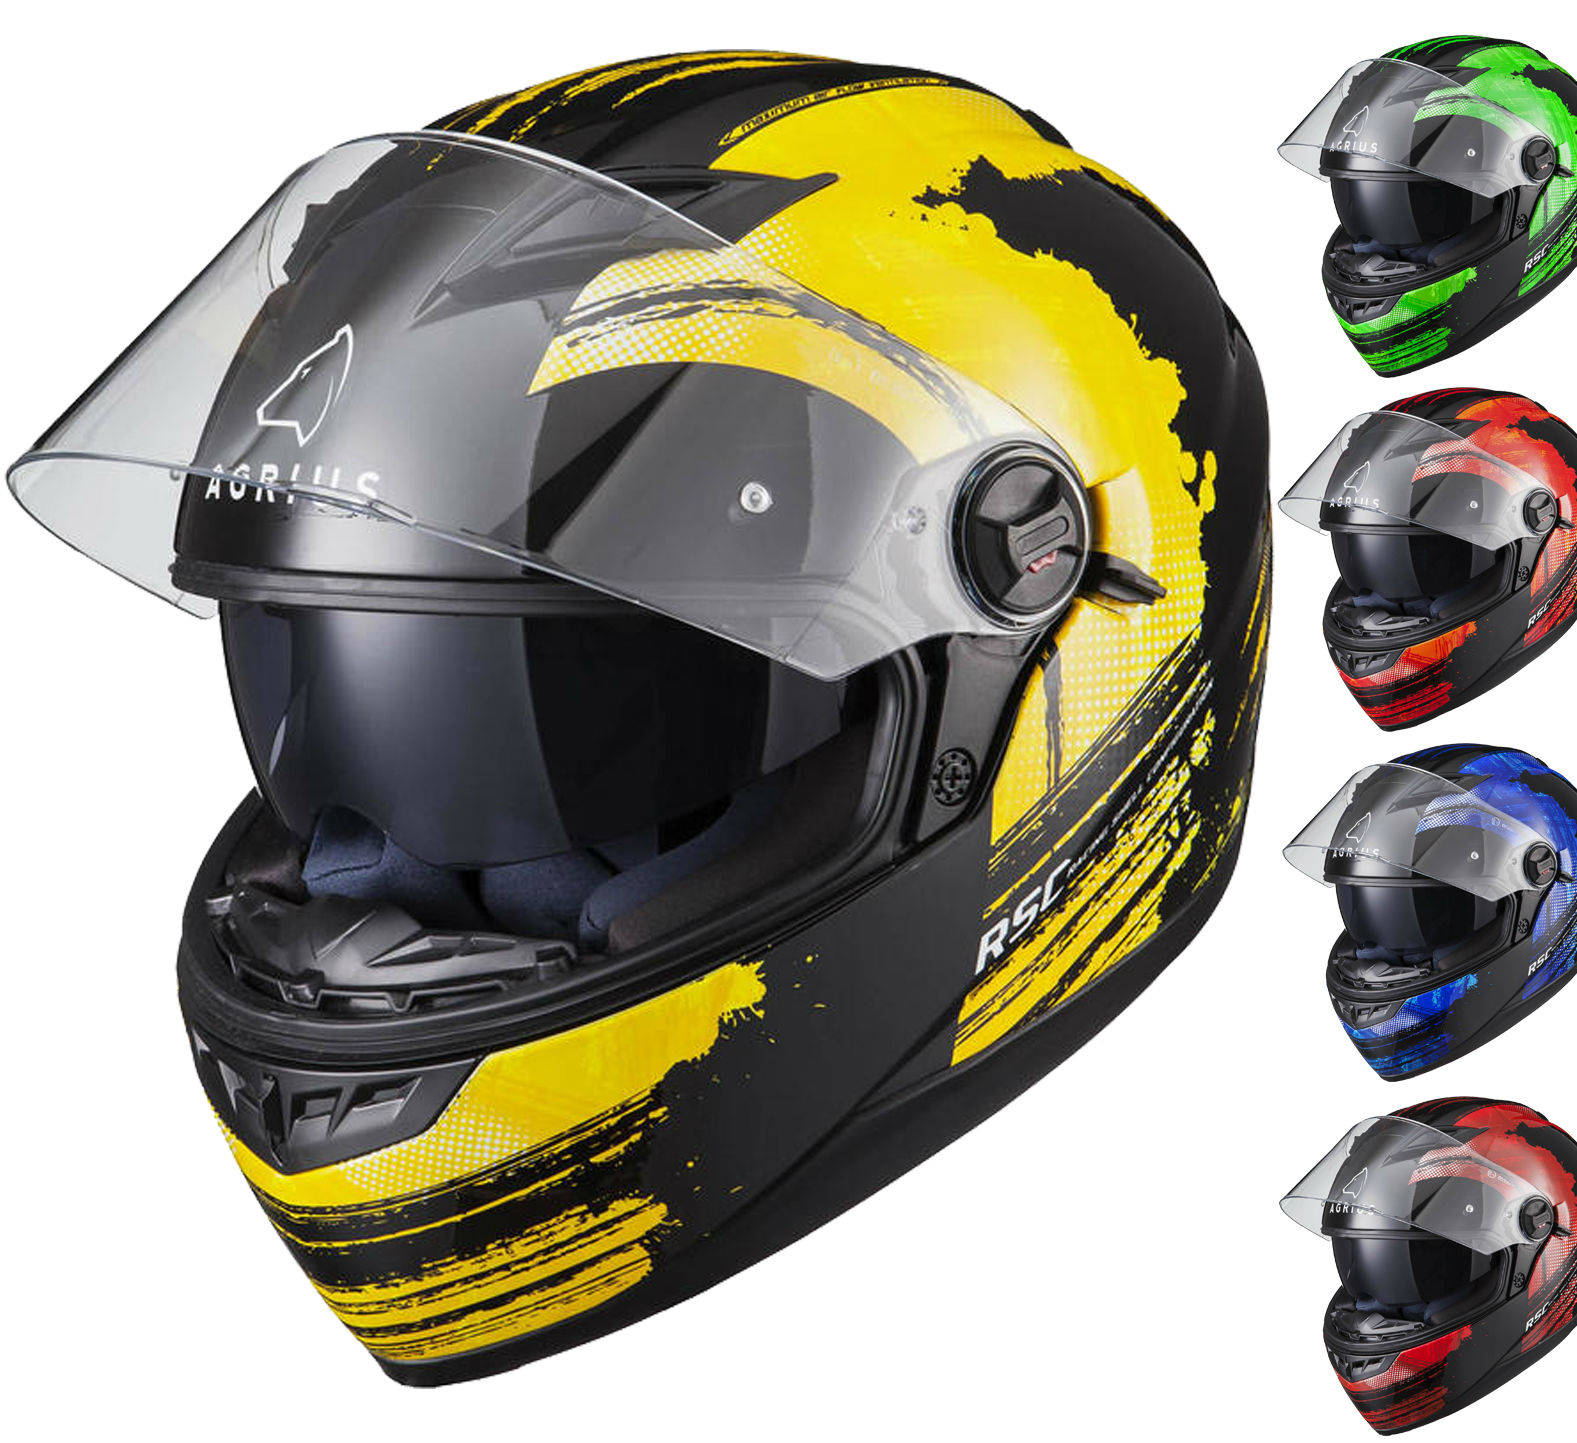 Did you know you can get a four-star Sharp-approved helmet for £27.99? So why pay more?